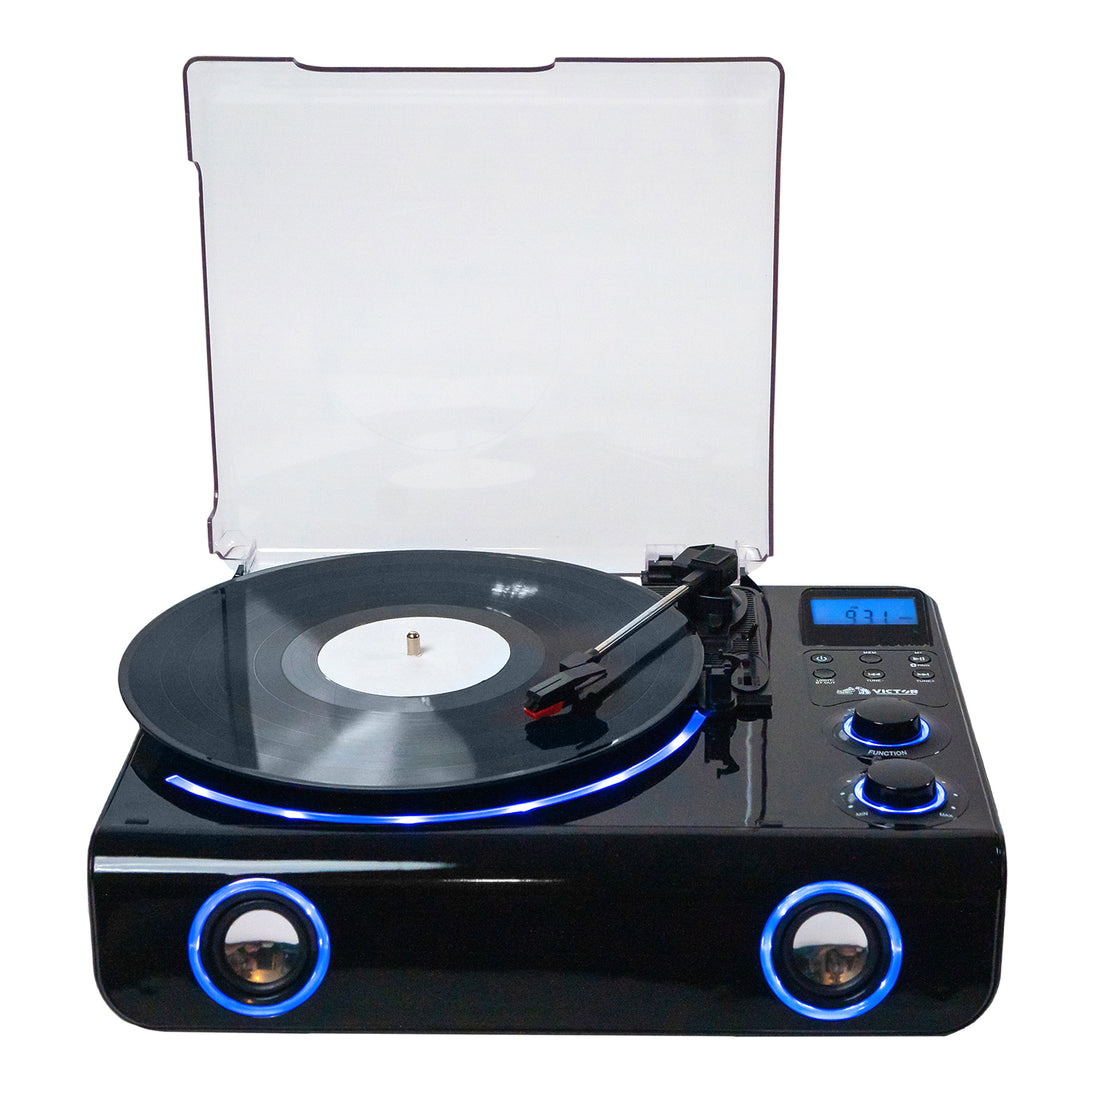 VICTOR Beacon 5-in-1 Turntable System with Blue LED Accent Lighting, Black (VHRP-1200-BK)